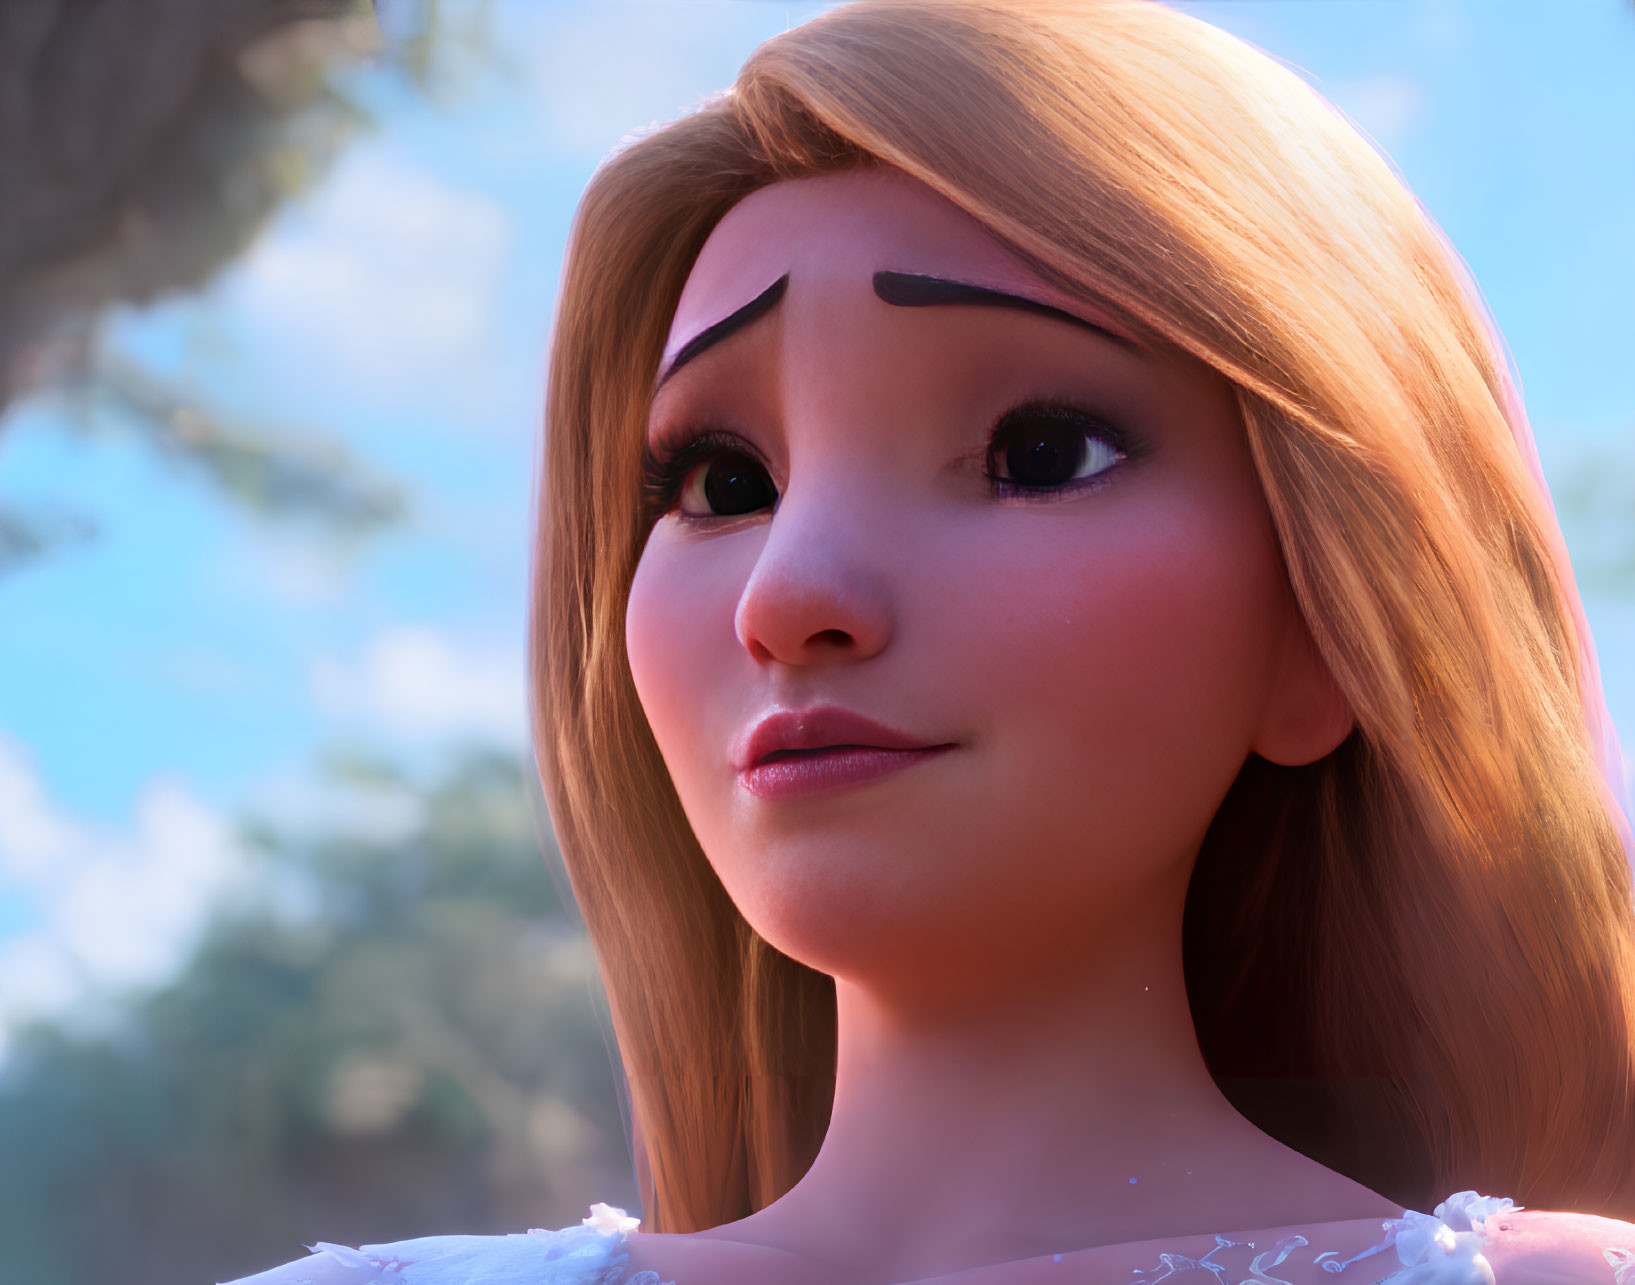 Blonde Female 3D Character Close-Up with Expressive Eyes